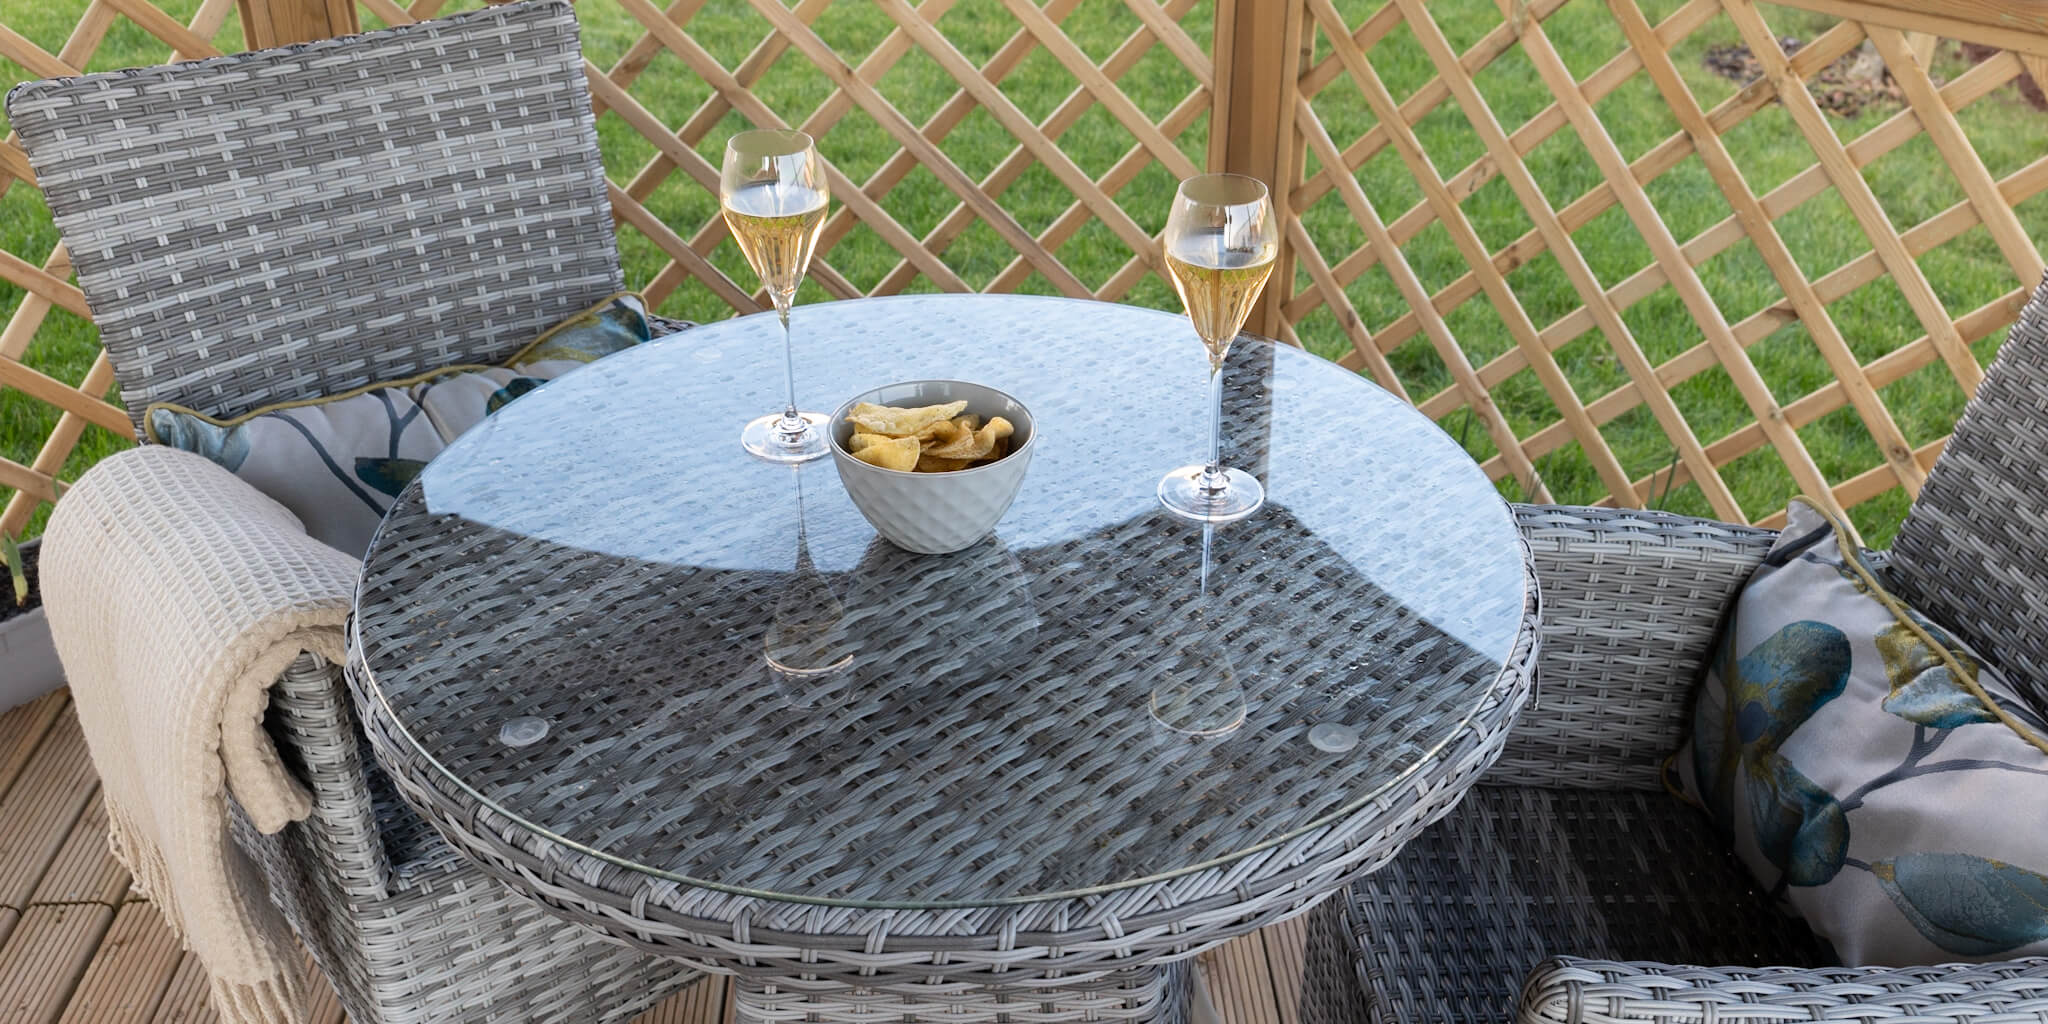 Garden table and chairs with floral pillows and brown/cream blanket. Bowl of crisps and two wine glasses.